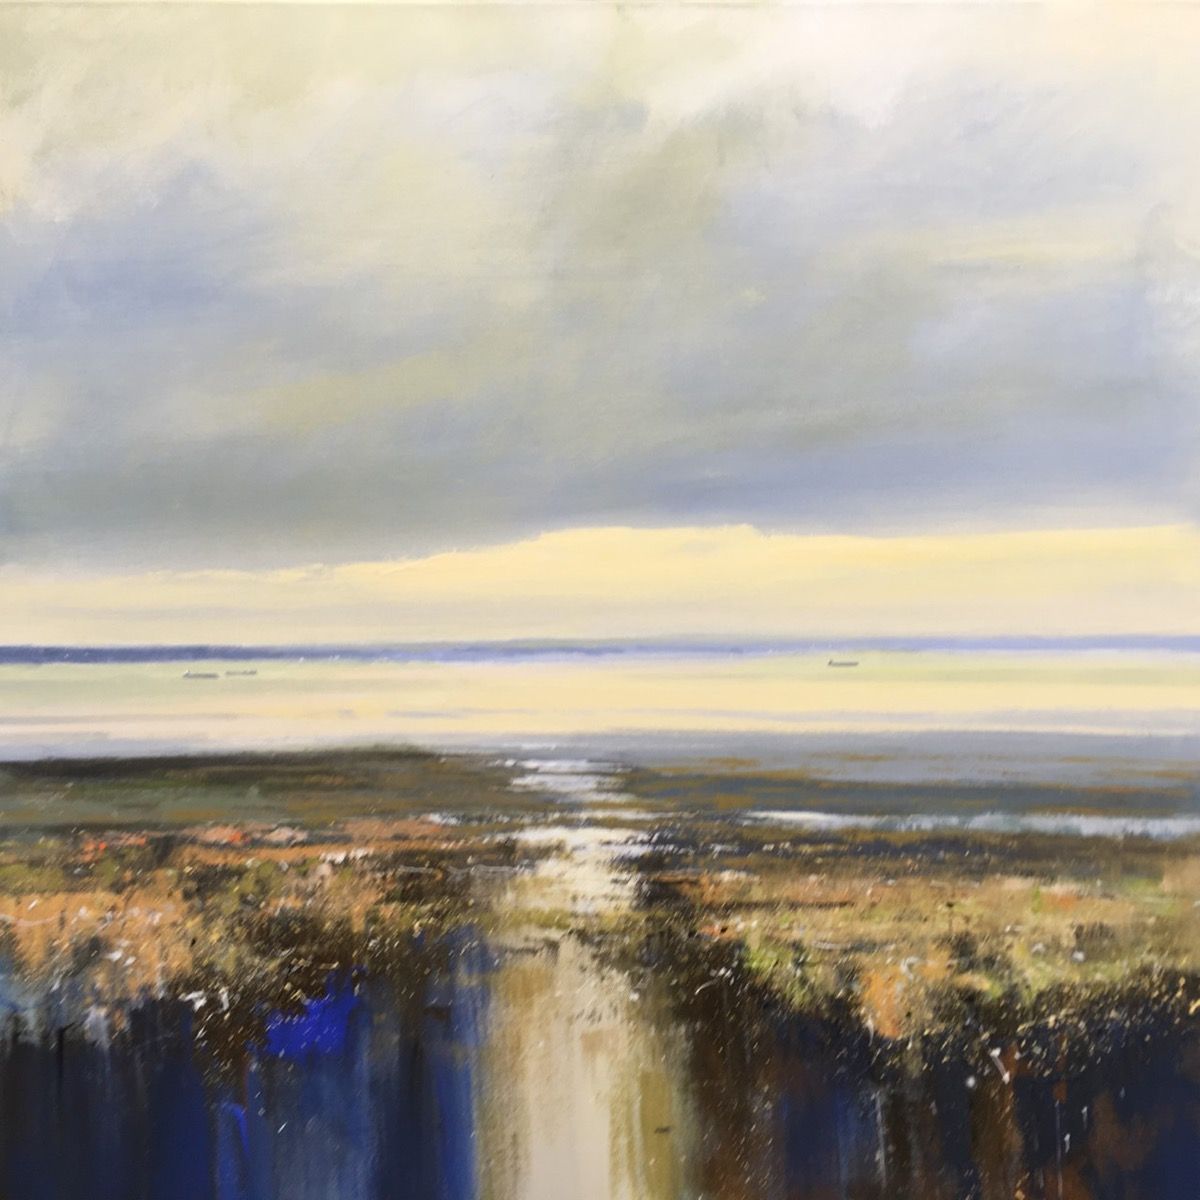 Fading light in the Estuary by Jonathan Trim